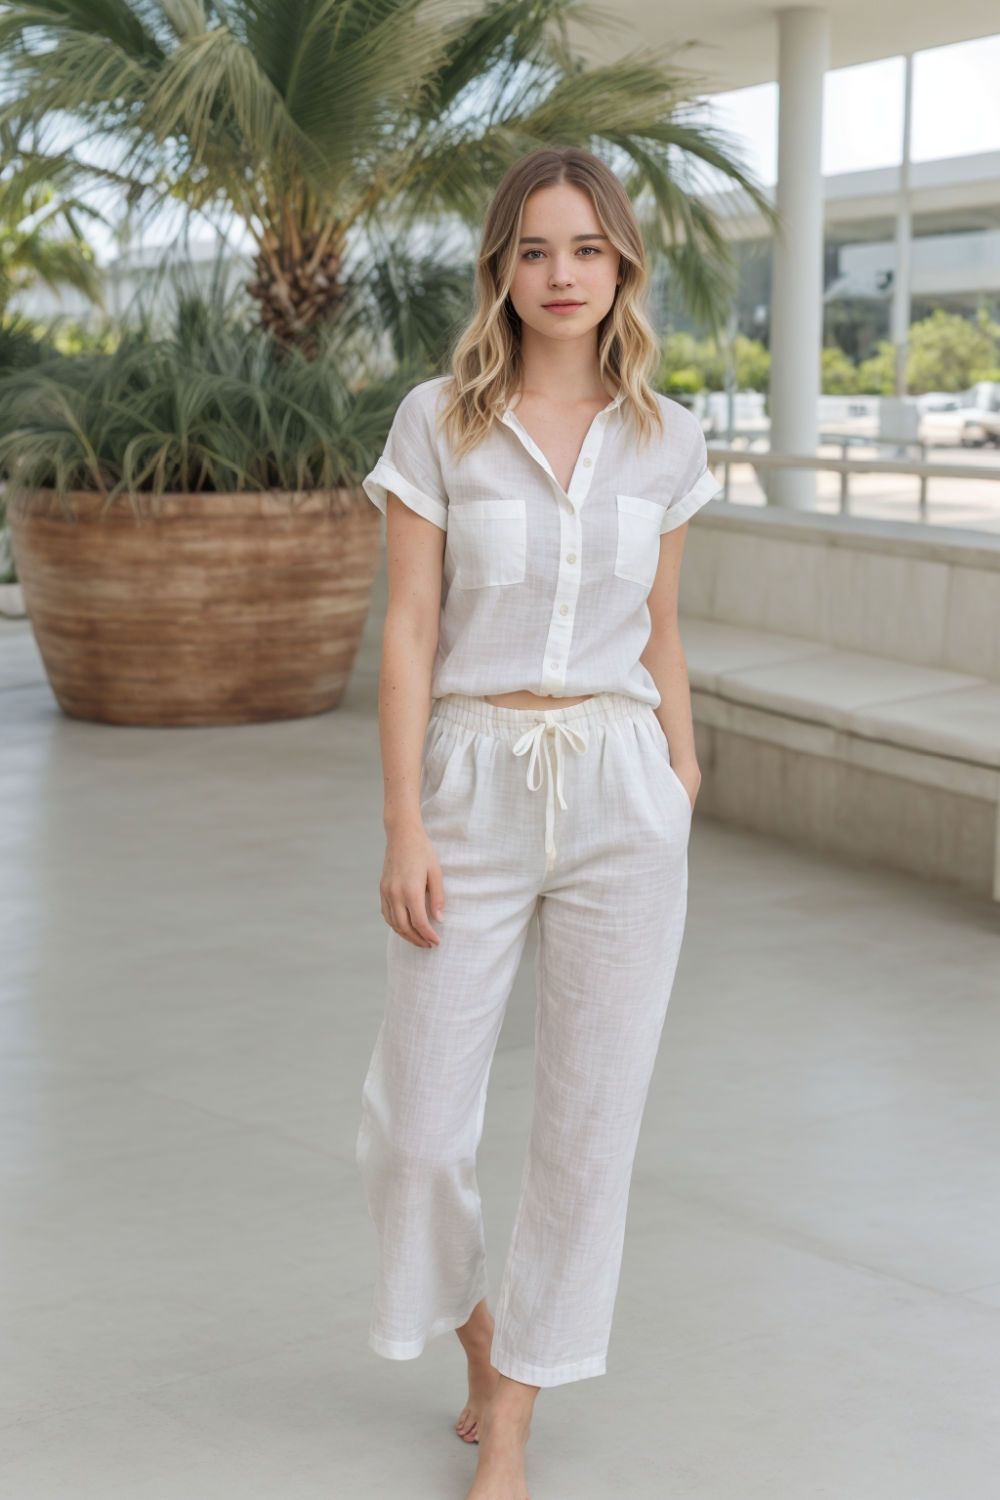 comfortable light and airy linen ensemble